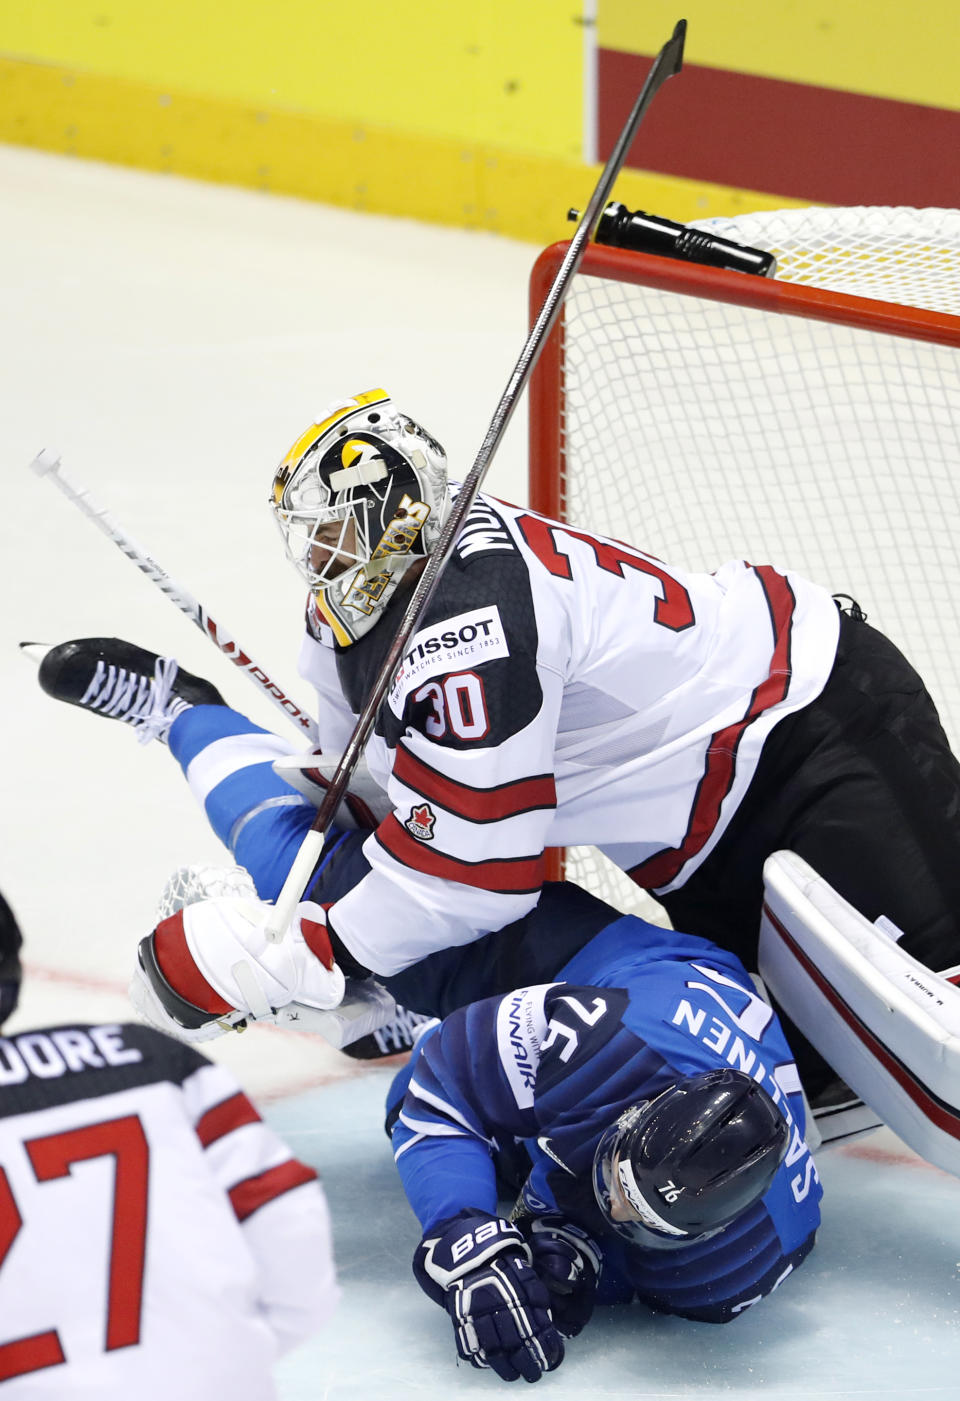 Finland's Jere Sallinen, down, collides with Canada's goaltender Matt Murray, up, during the Ice Hockey World Championships group A match between Finland and Canada at the Steel Arena in Kosice, Slovakia, Friday, May 10, 2019. (AP Photo/Petr David Josek)